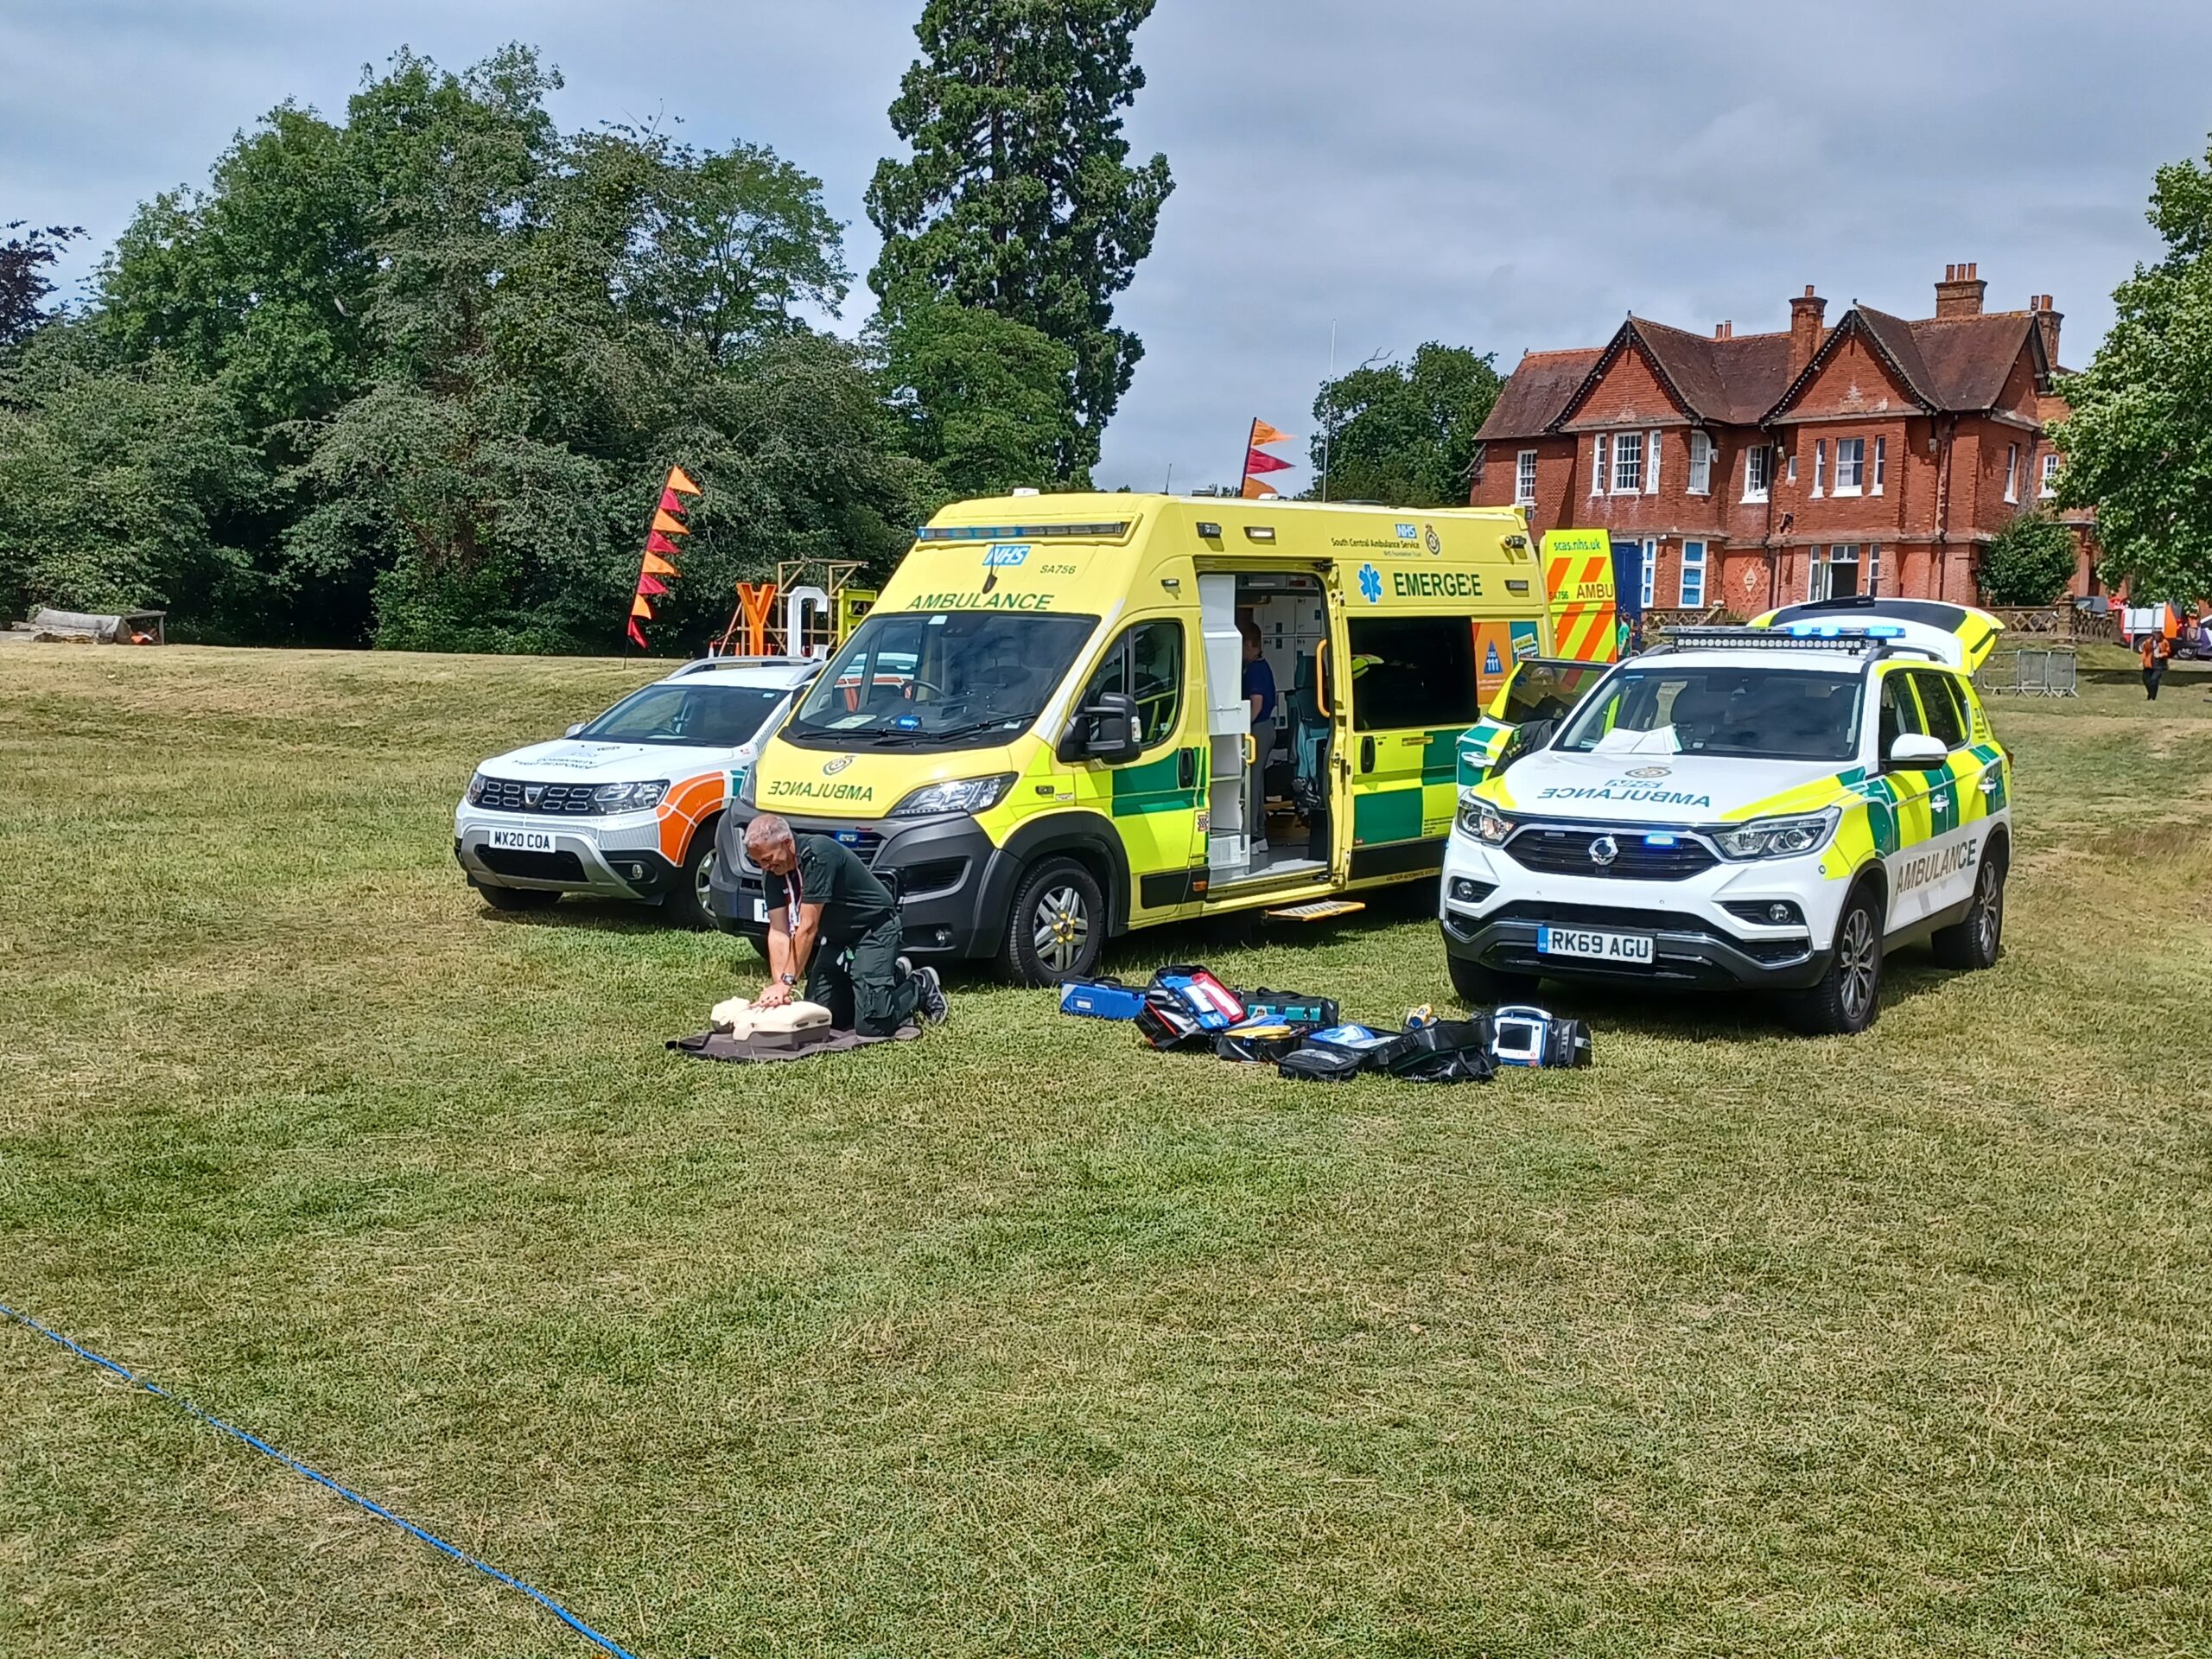 SCAS vehicles in open field at the festival